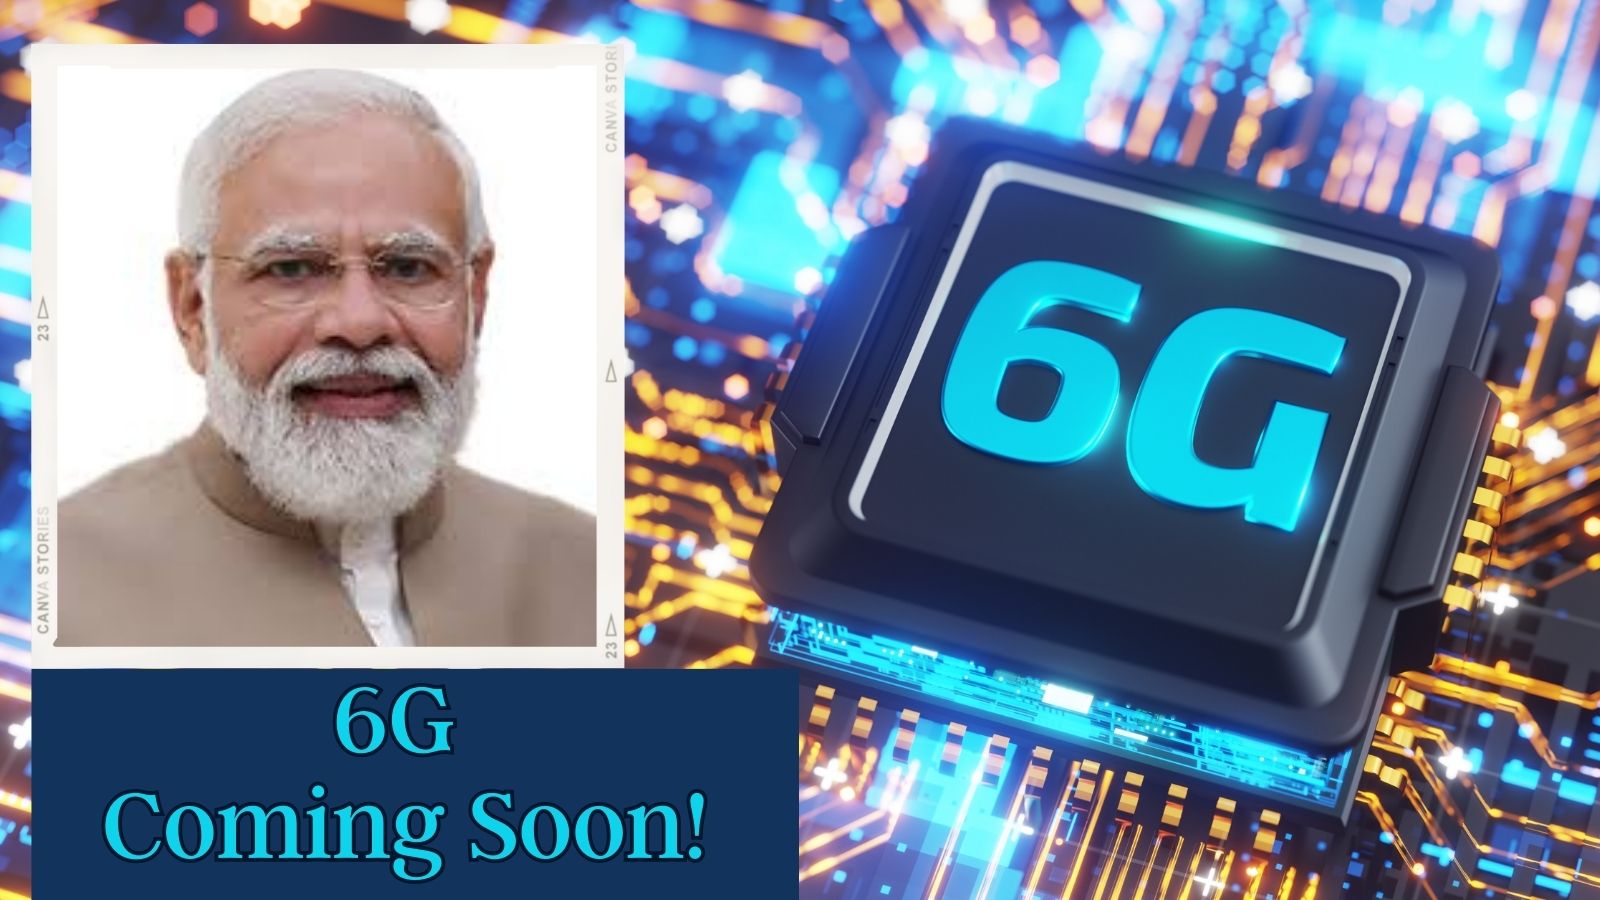 India’s Next vision: 6G rollout in India soon